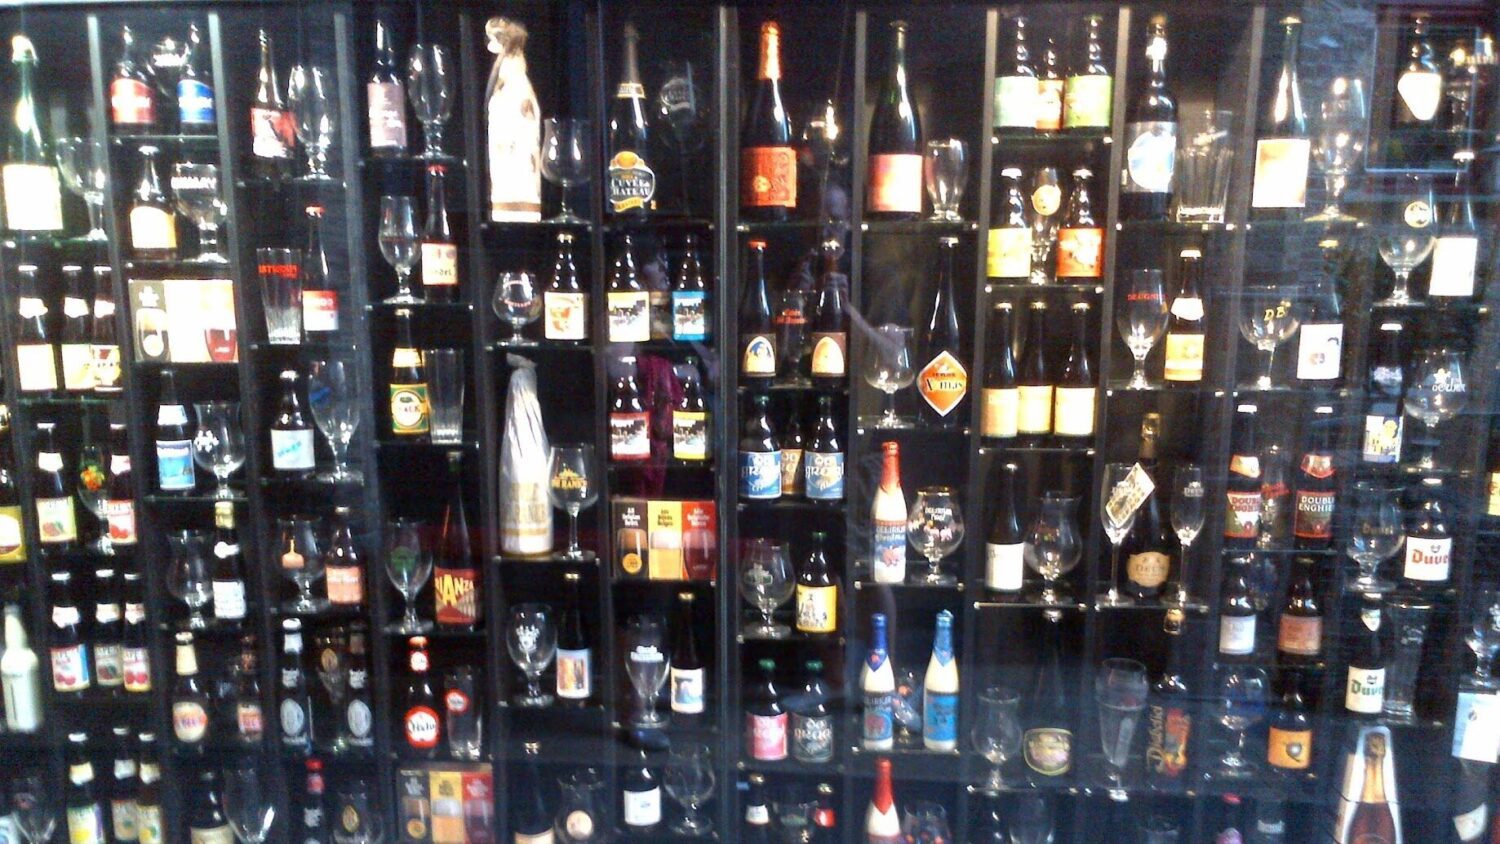 The famous Beer wall in Bruges